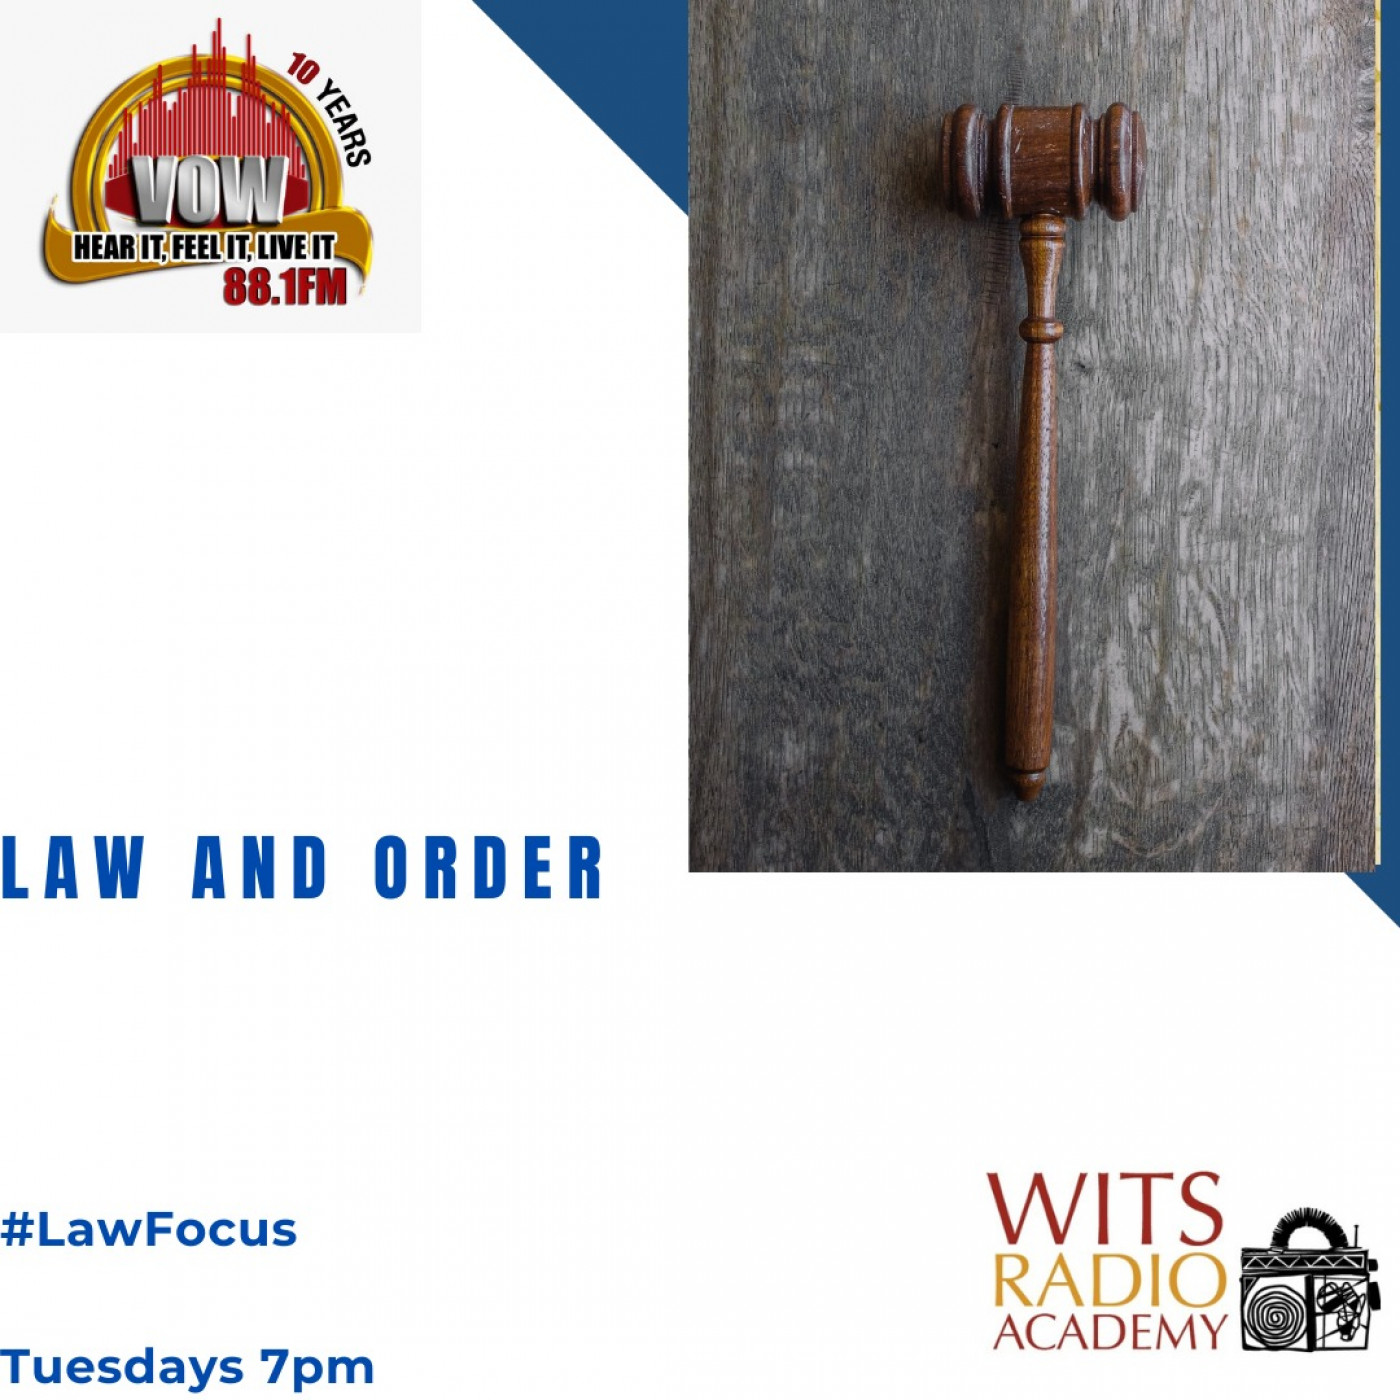 Law Focus - Law and Order